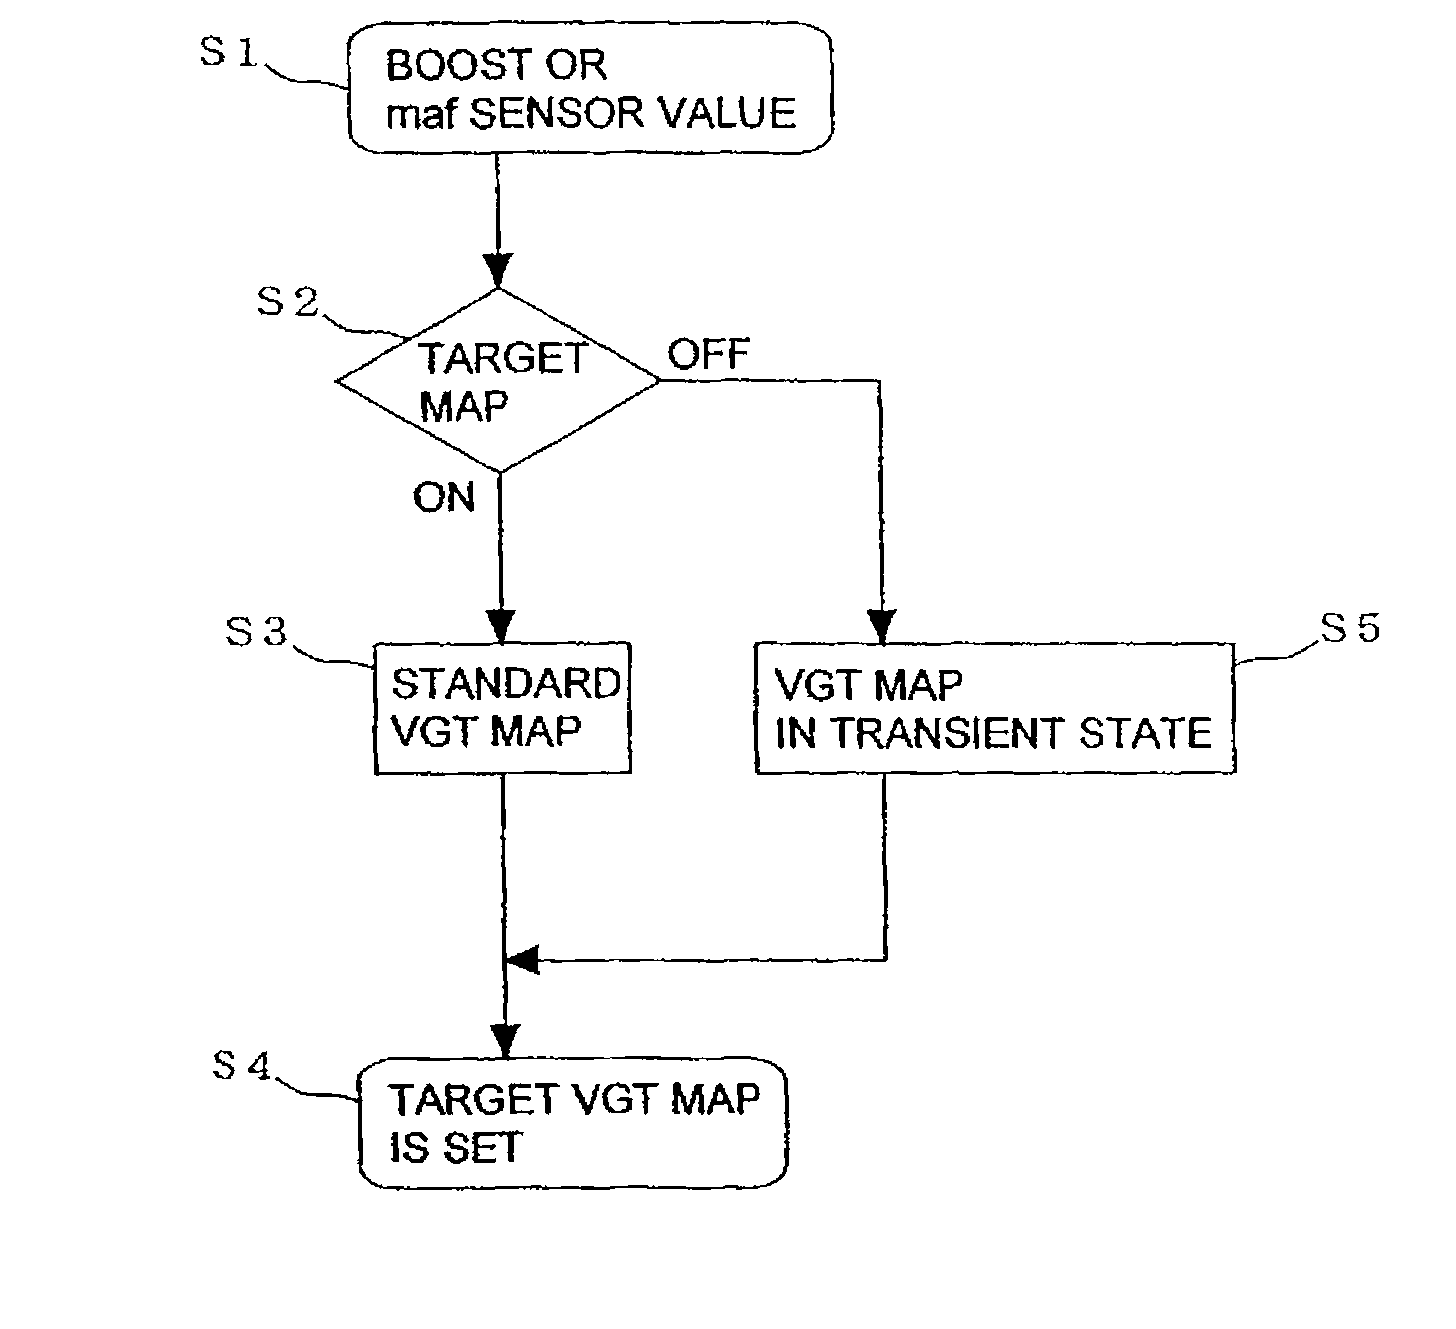 Control device for multi-stage turbochargers